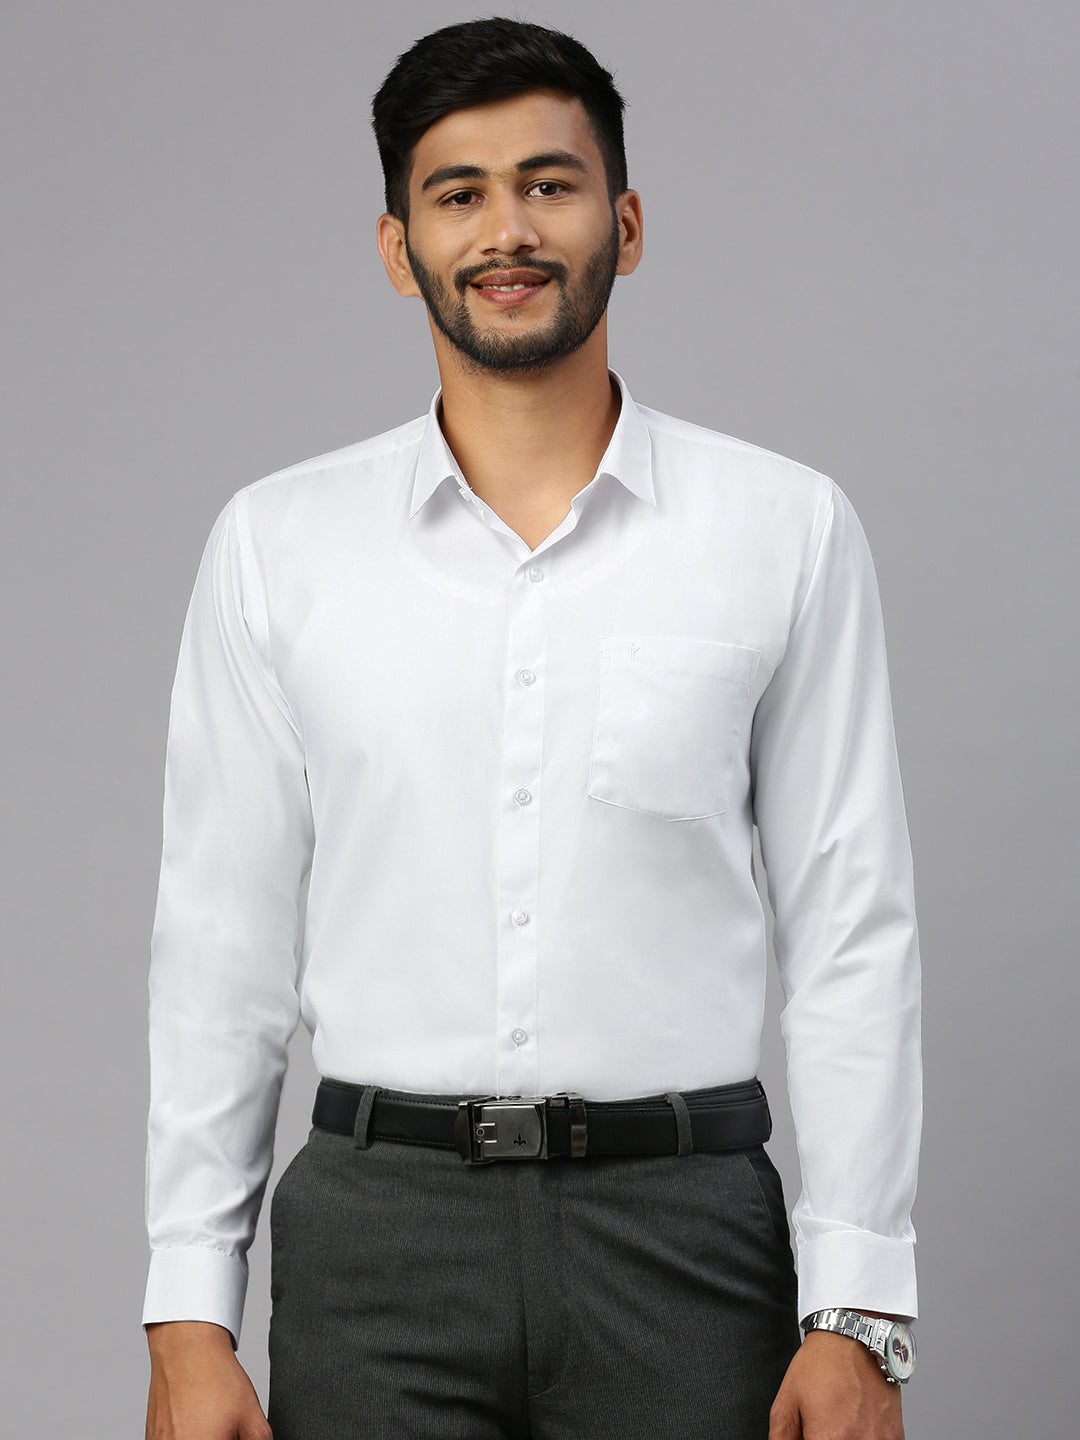 Mens 100% Cotton Royal Look White Shirt - Justice White